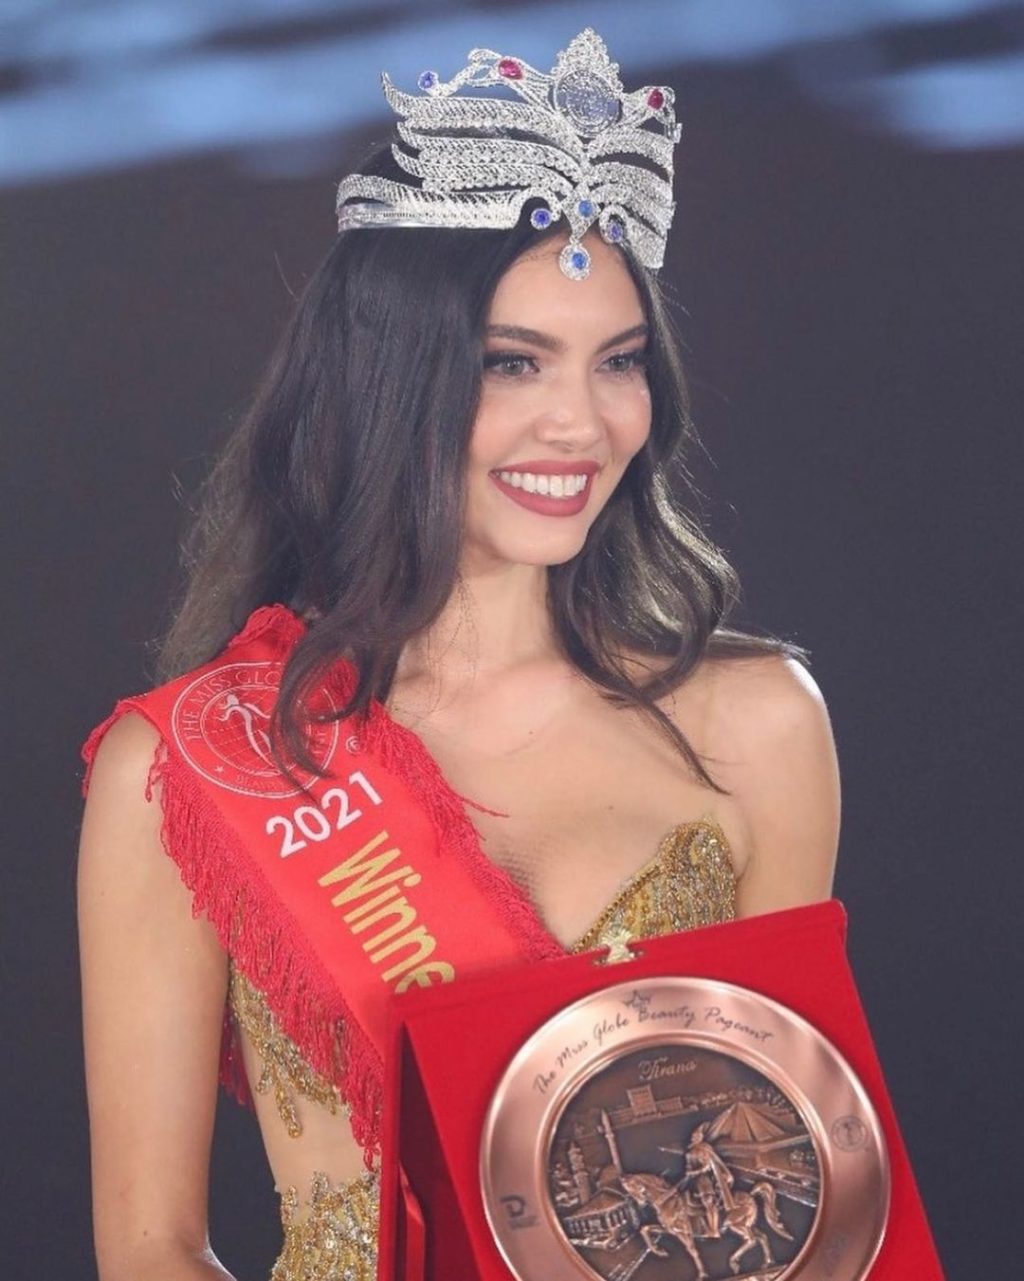 Maureen Montagne was crowned as Miss Globe 20212 on Saturday, November 6, 2021. |Photo from Maureen Montagne's Instagram account